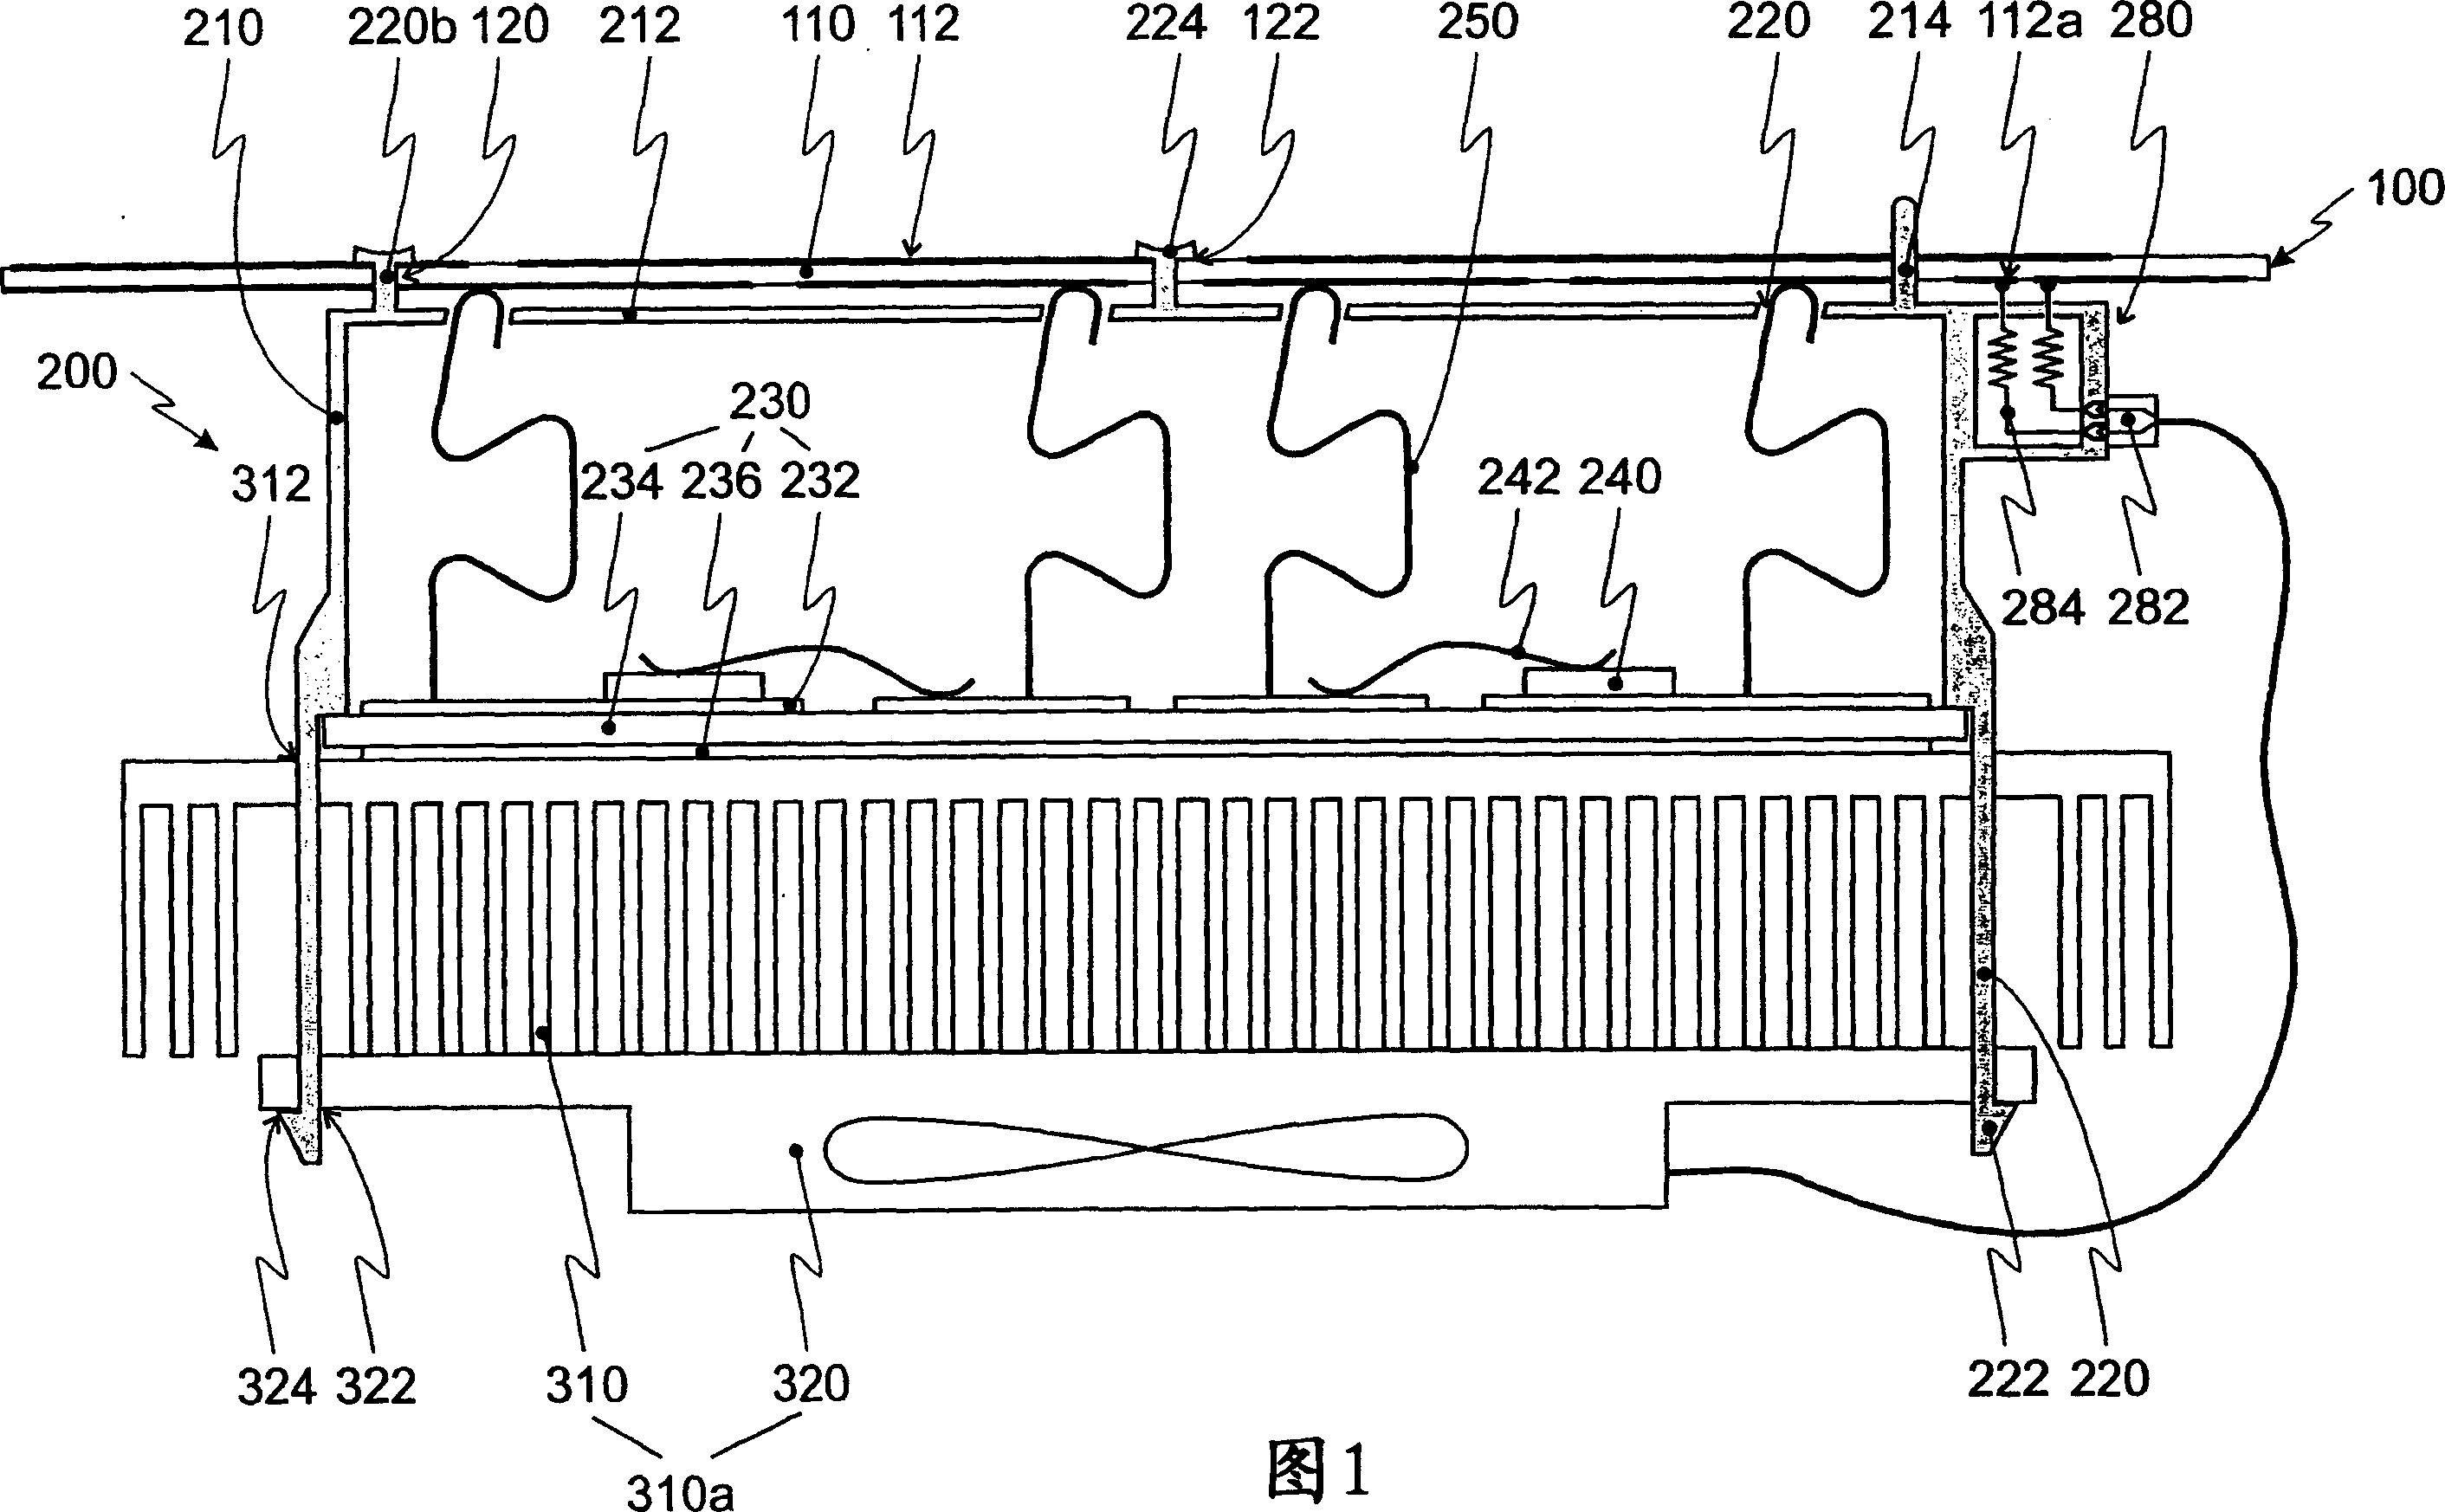 Structure of forming pressure contact with power semiconductor module